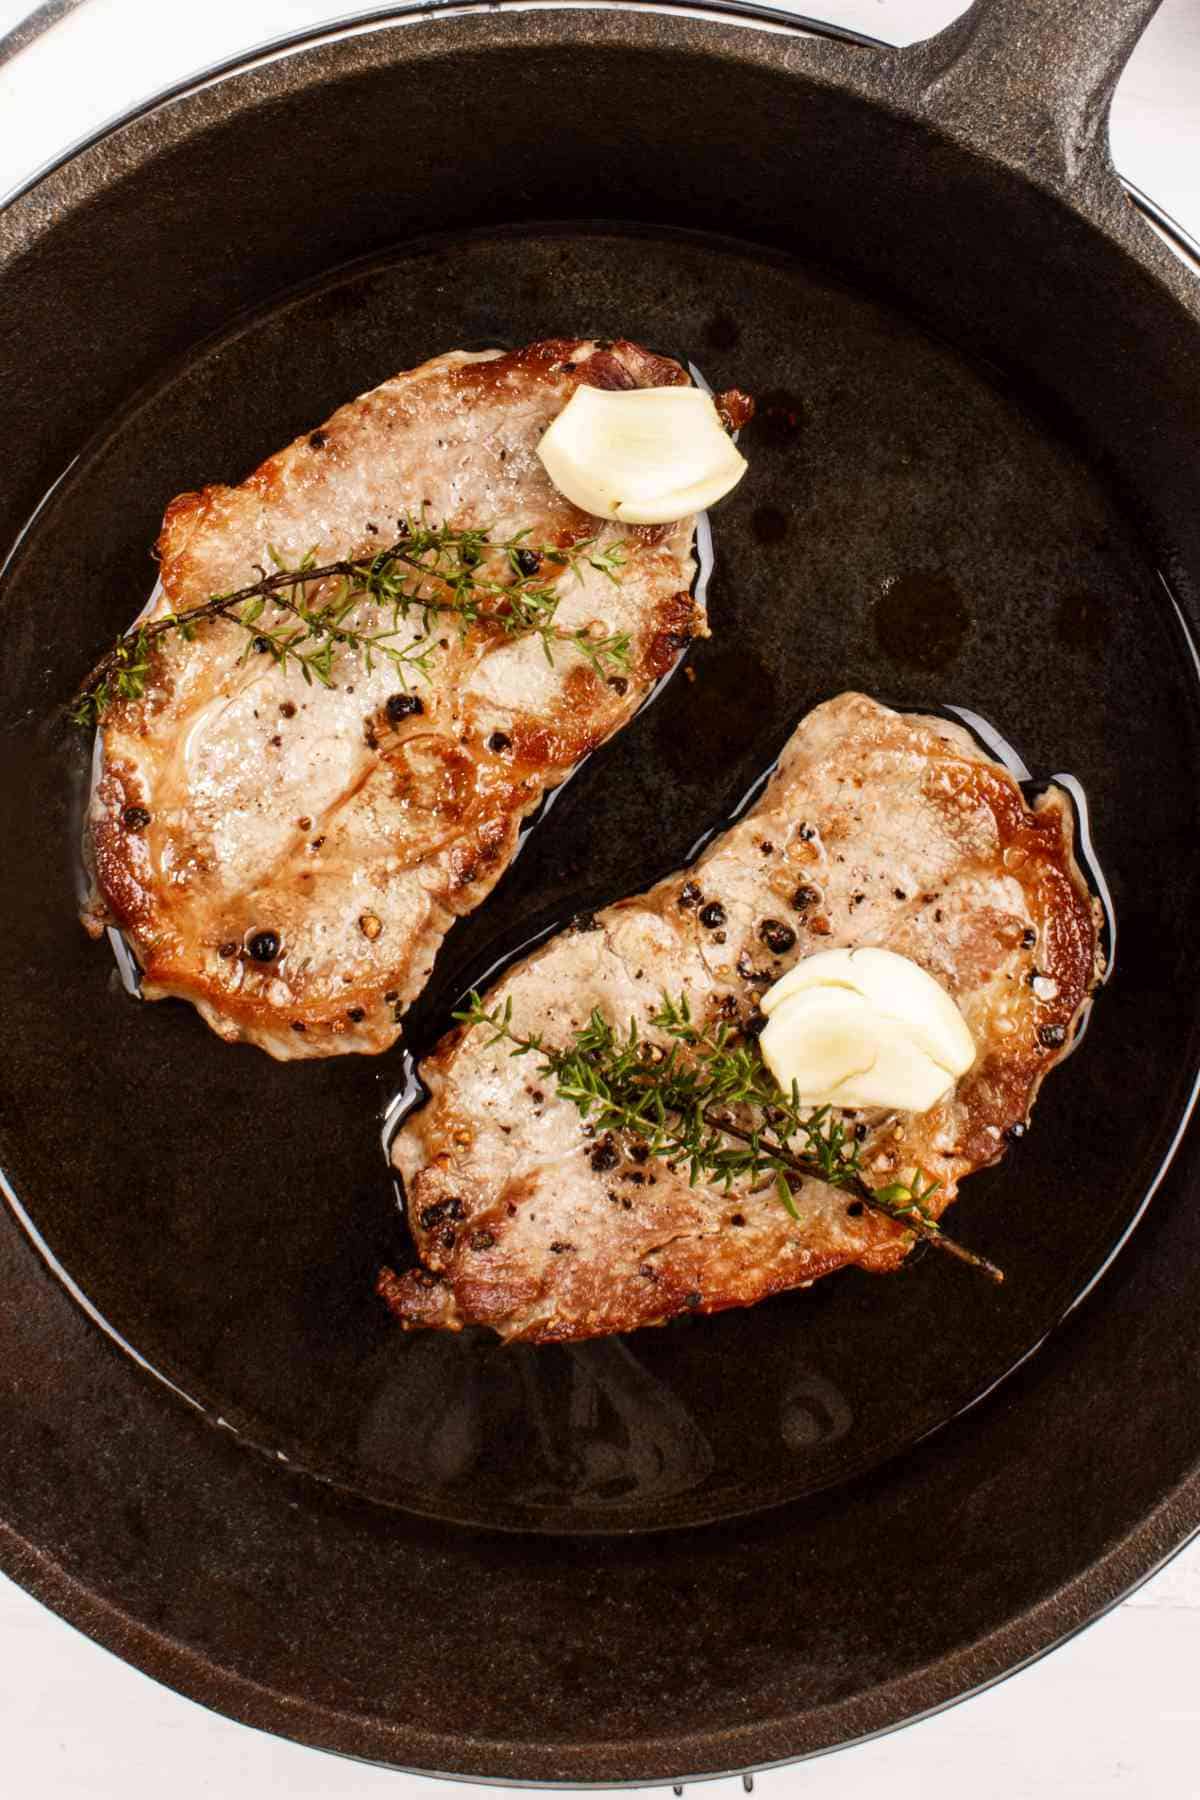 Pan grilled pork chops with thyme and garlic in a cast iron pan.